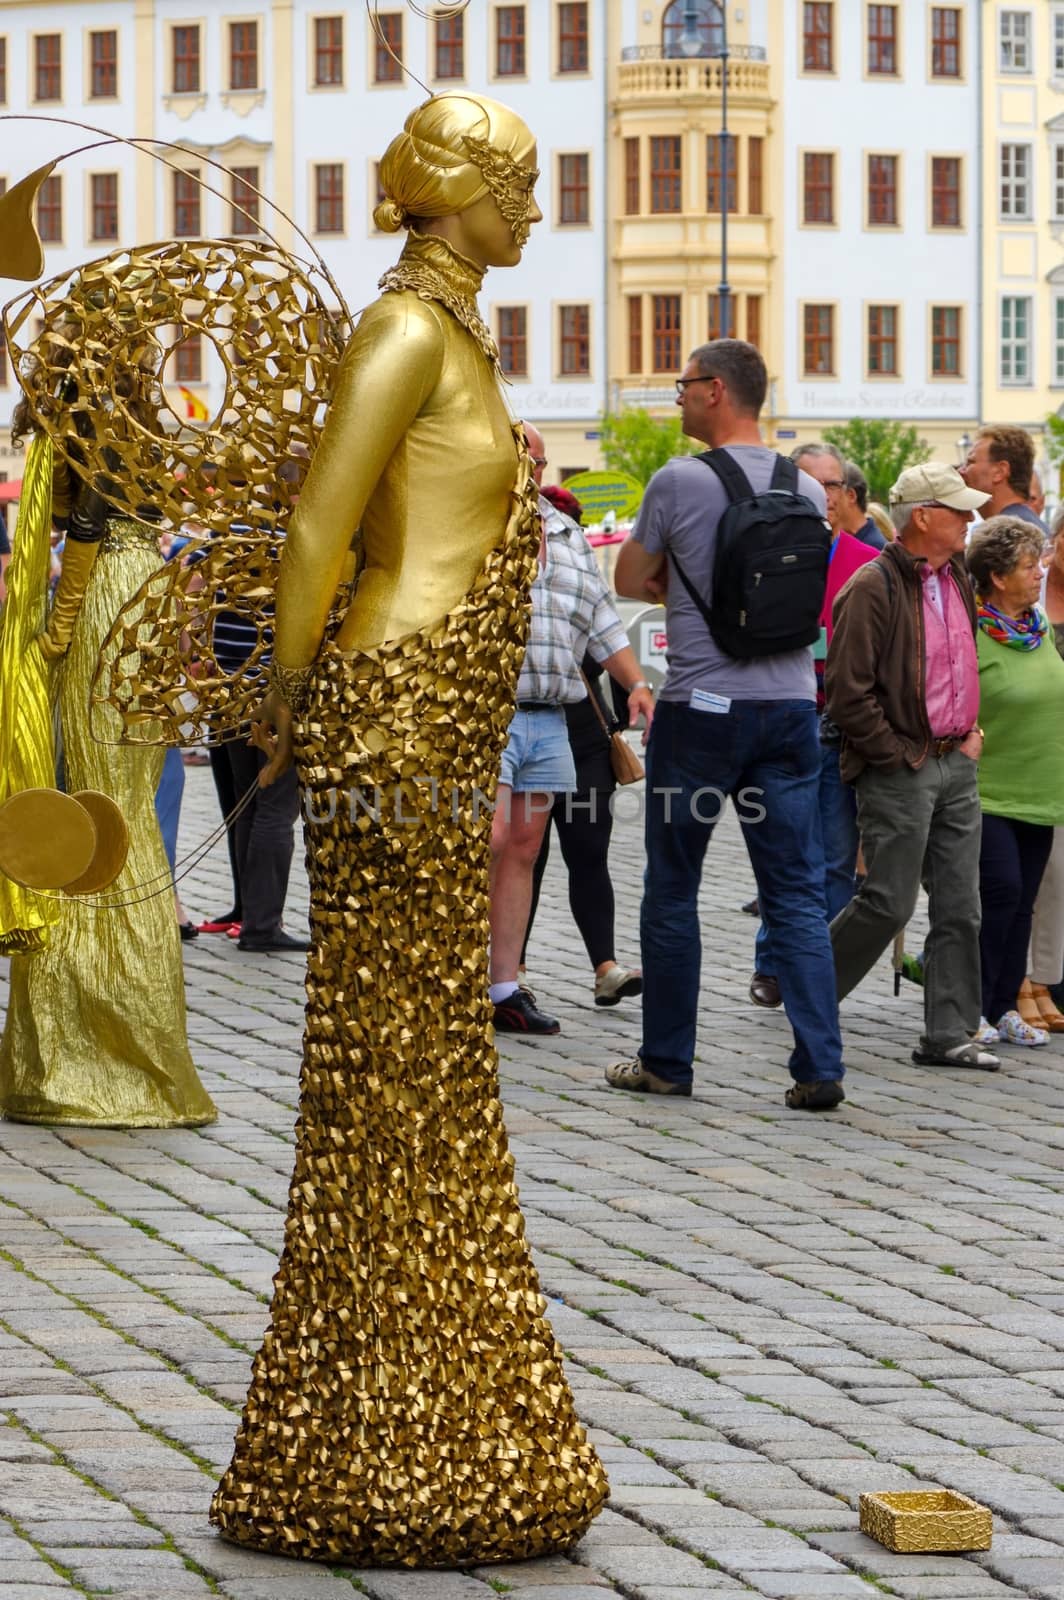 DRESDEN, GERMANY - JULY 13, 2015: a performer - Golden painted artists on a city street, living statues